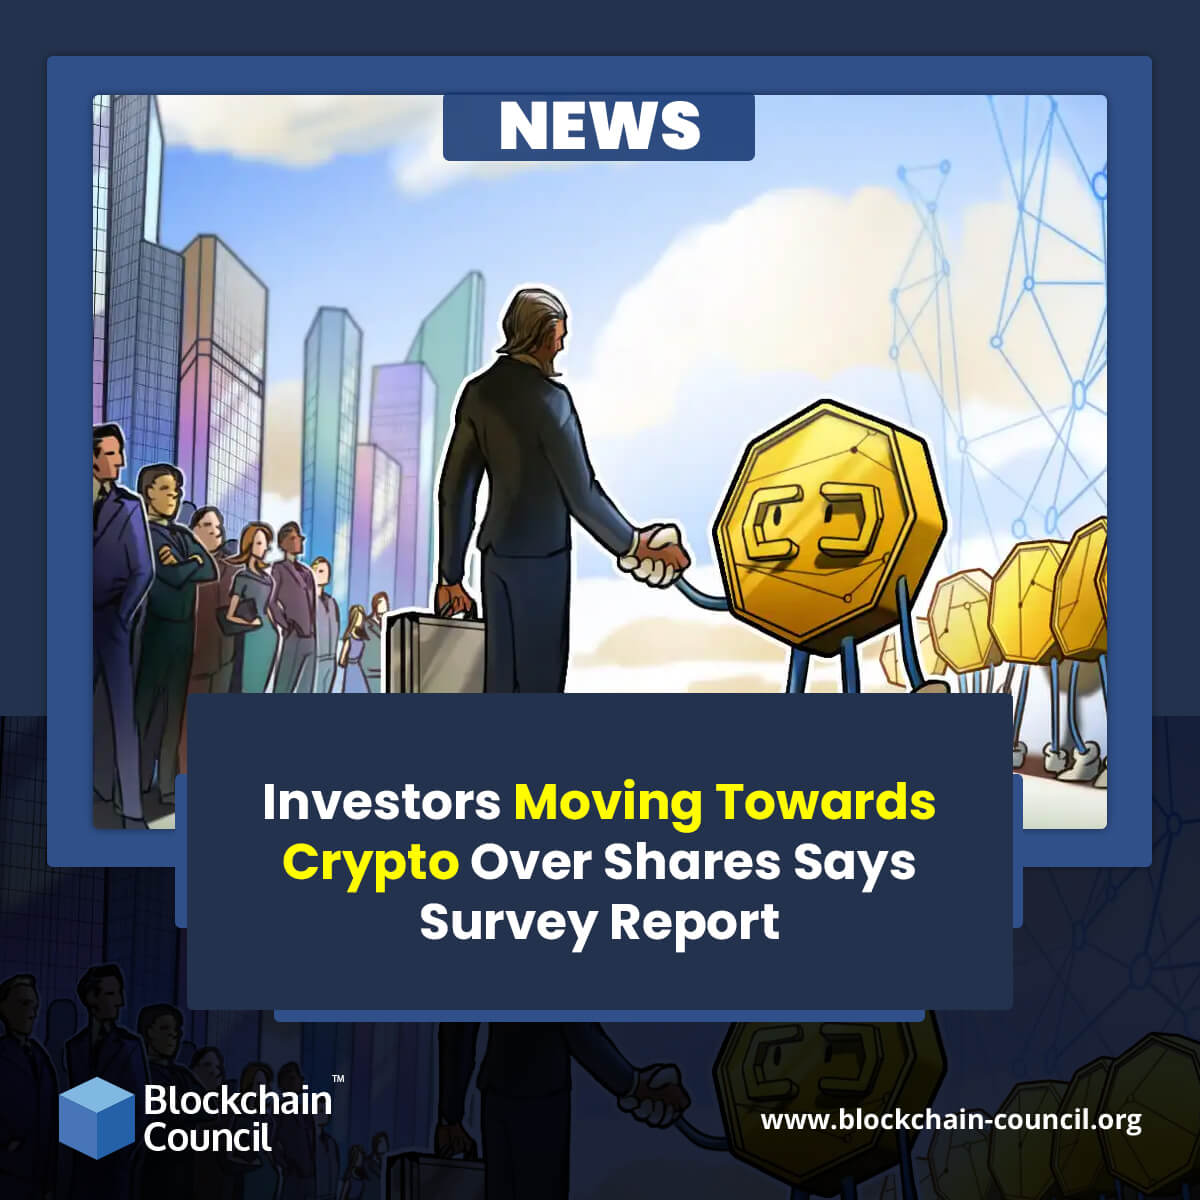 Investors Moving Towards Crypto Over Shares Says Survey Report